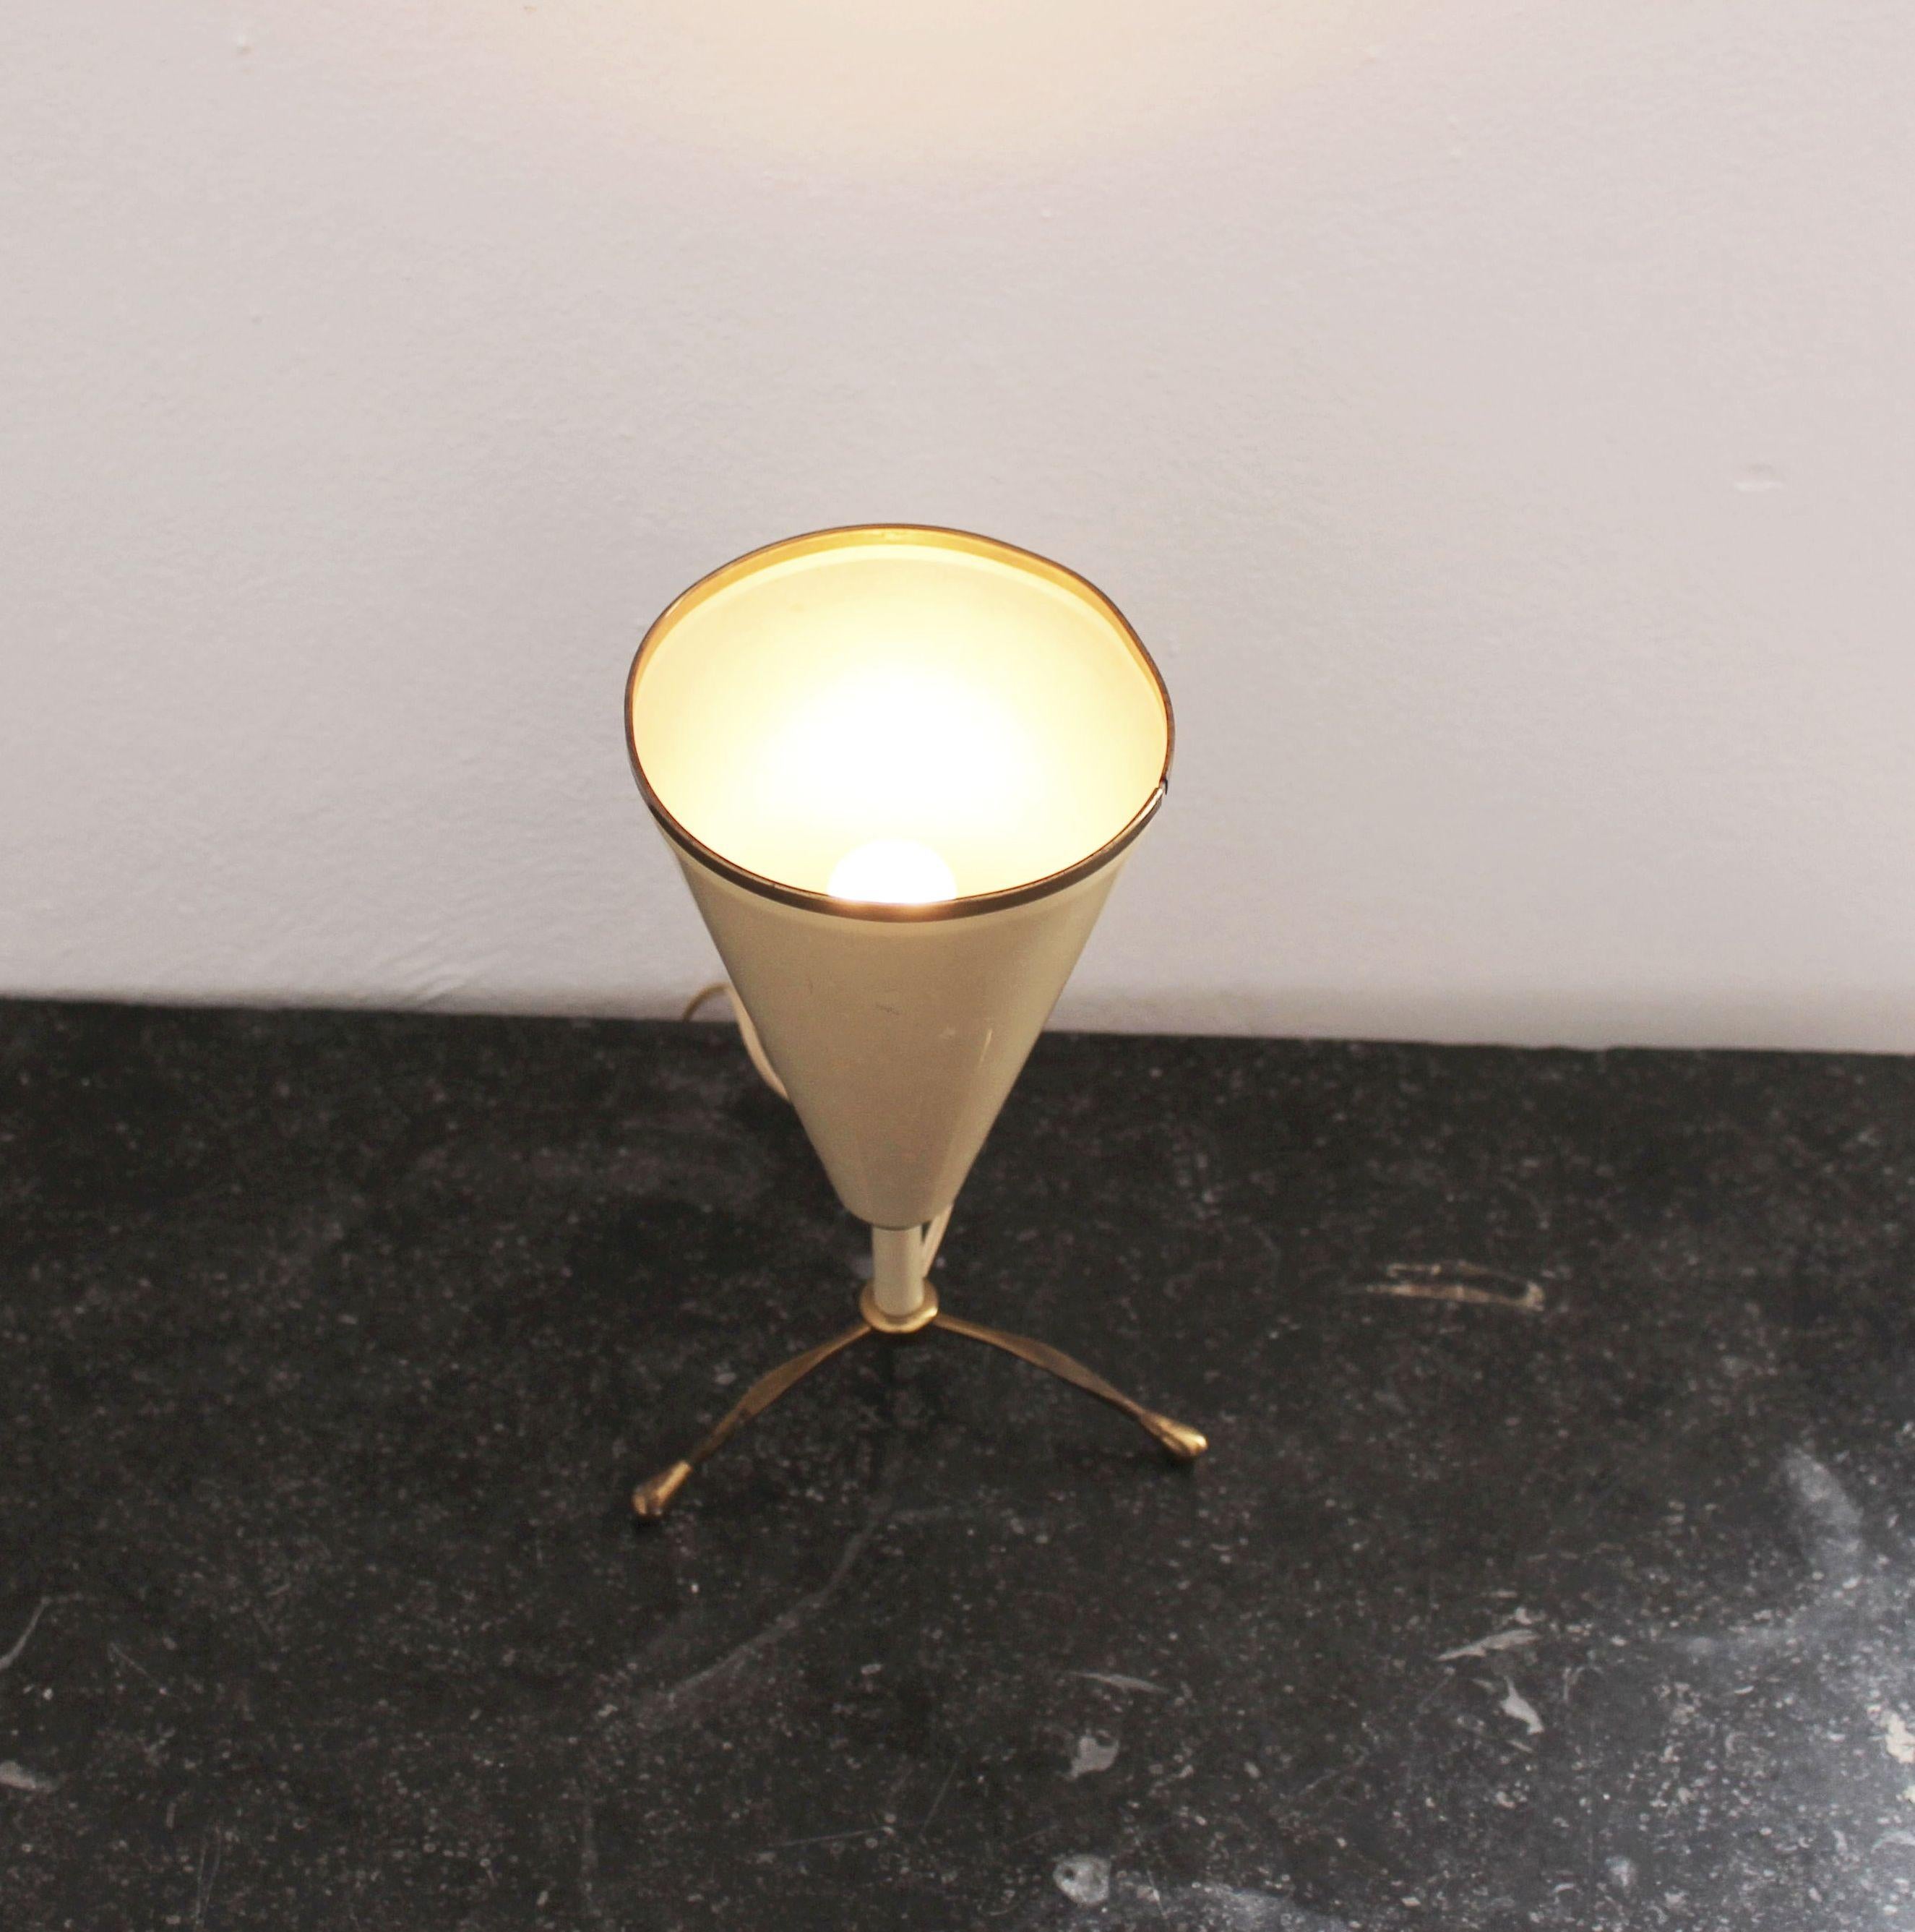 Italian table lamp from the 1950s in the style of Stilnovo. We have one more table lamp in green color table.